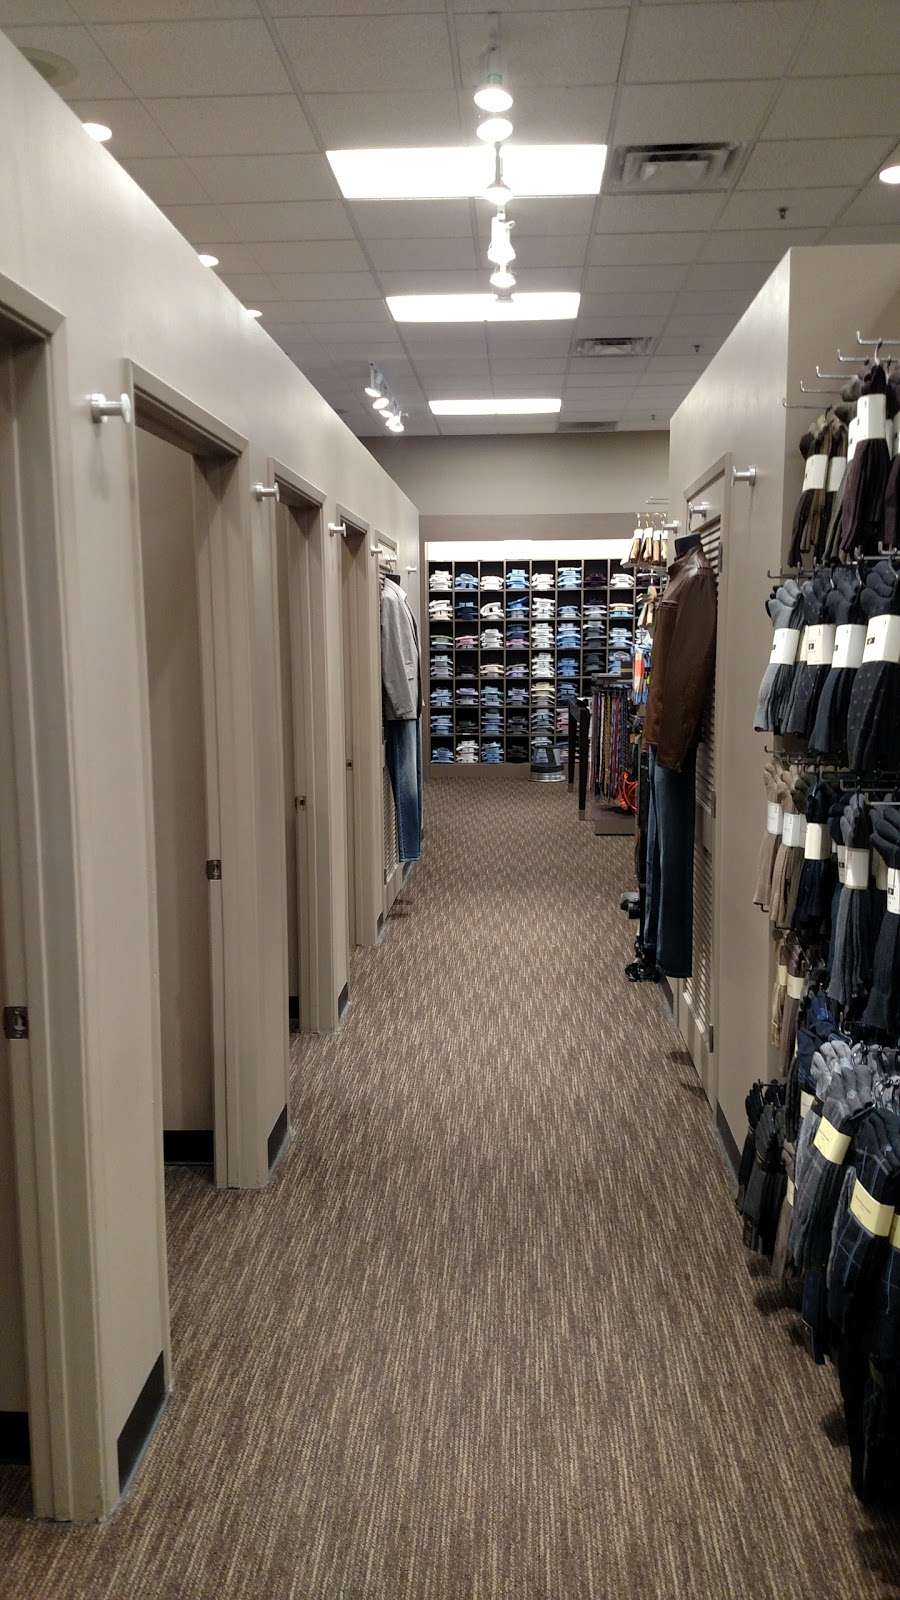 Mens Wearhouse | 23700 El Toro Rd Suite A, Lake Forest, CA 92630 | Phone: (949) 855-9711